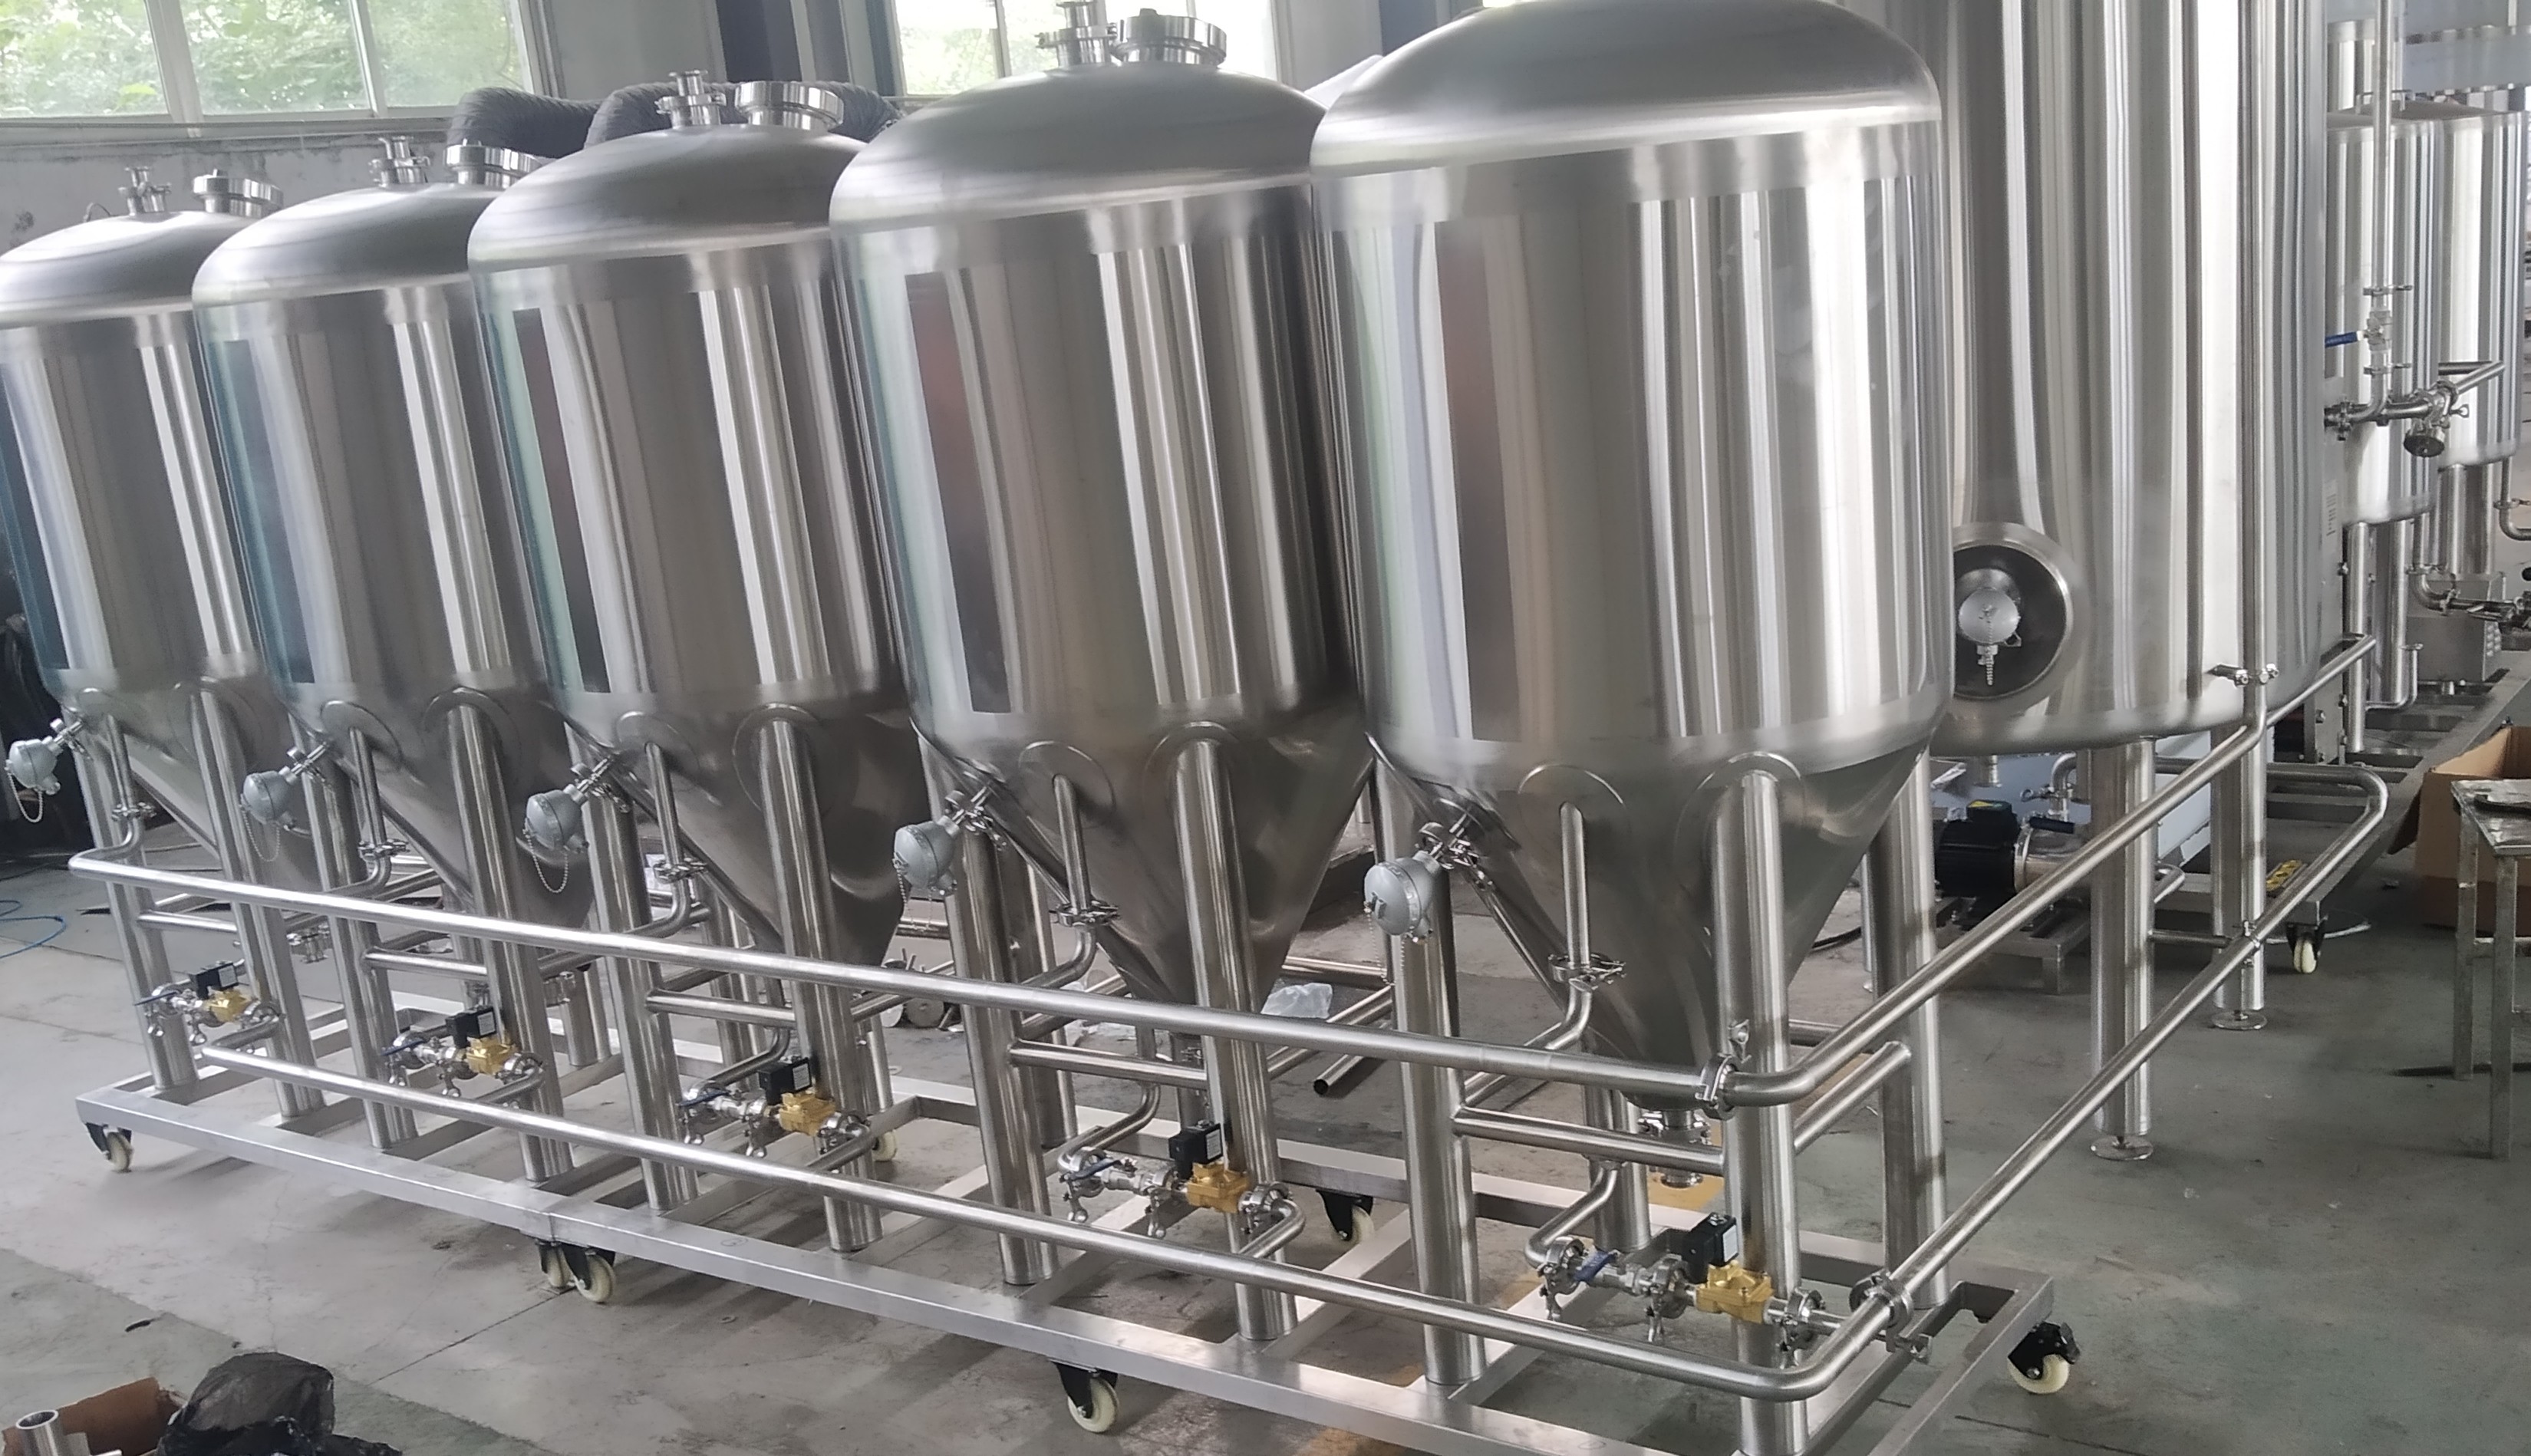 Big size SUS 304 beer brewing fermentation tanks hot sell in Sweden from Chinese manufacturer ZZ